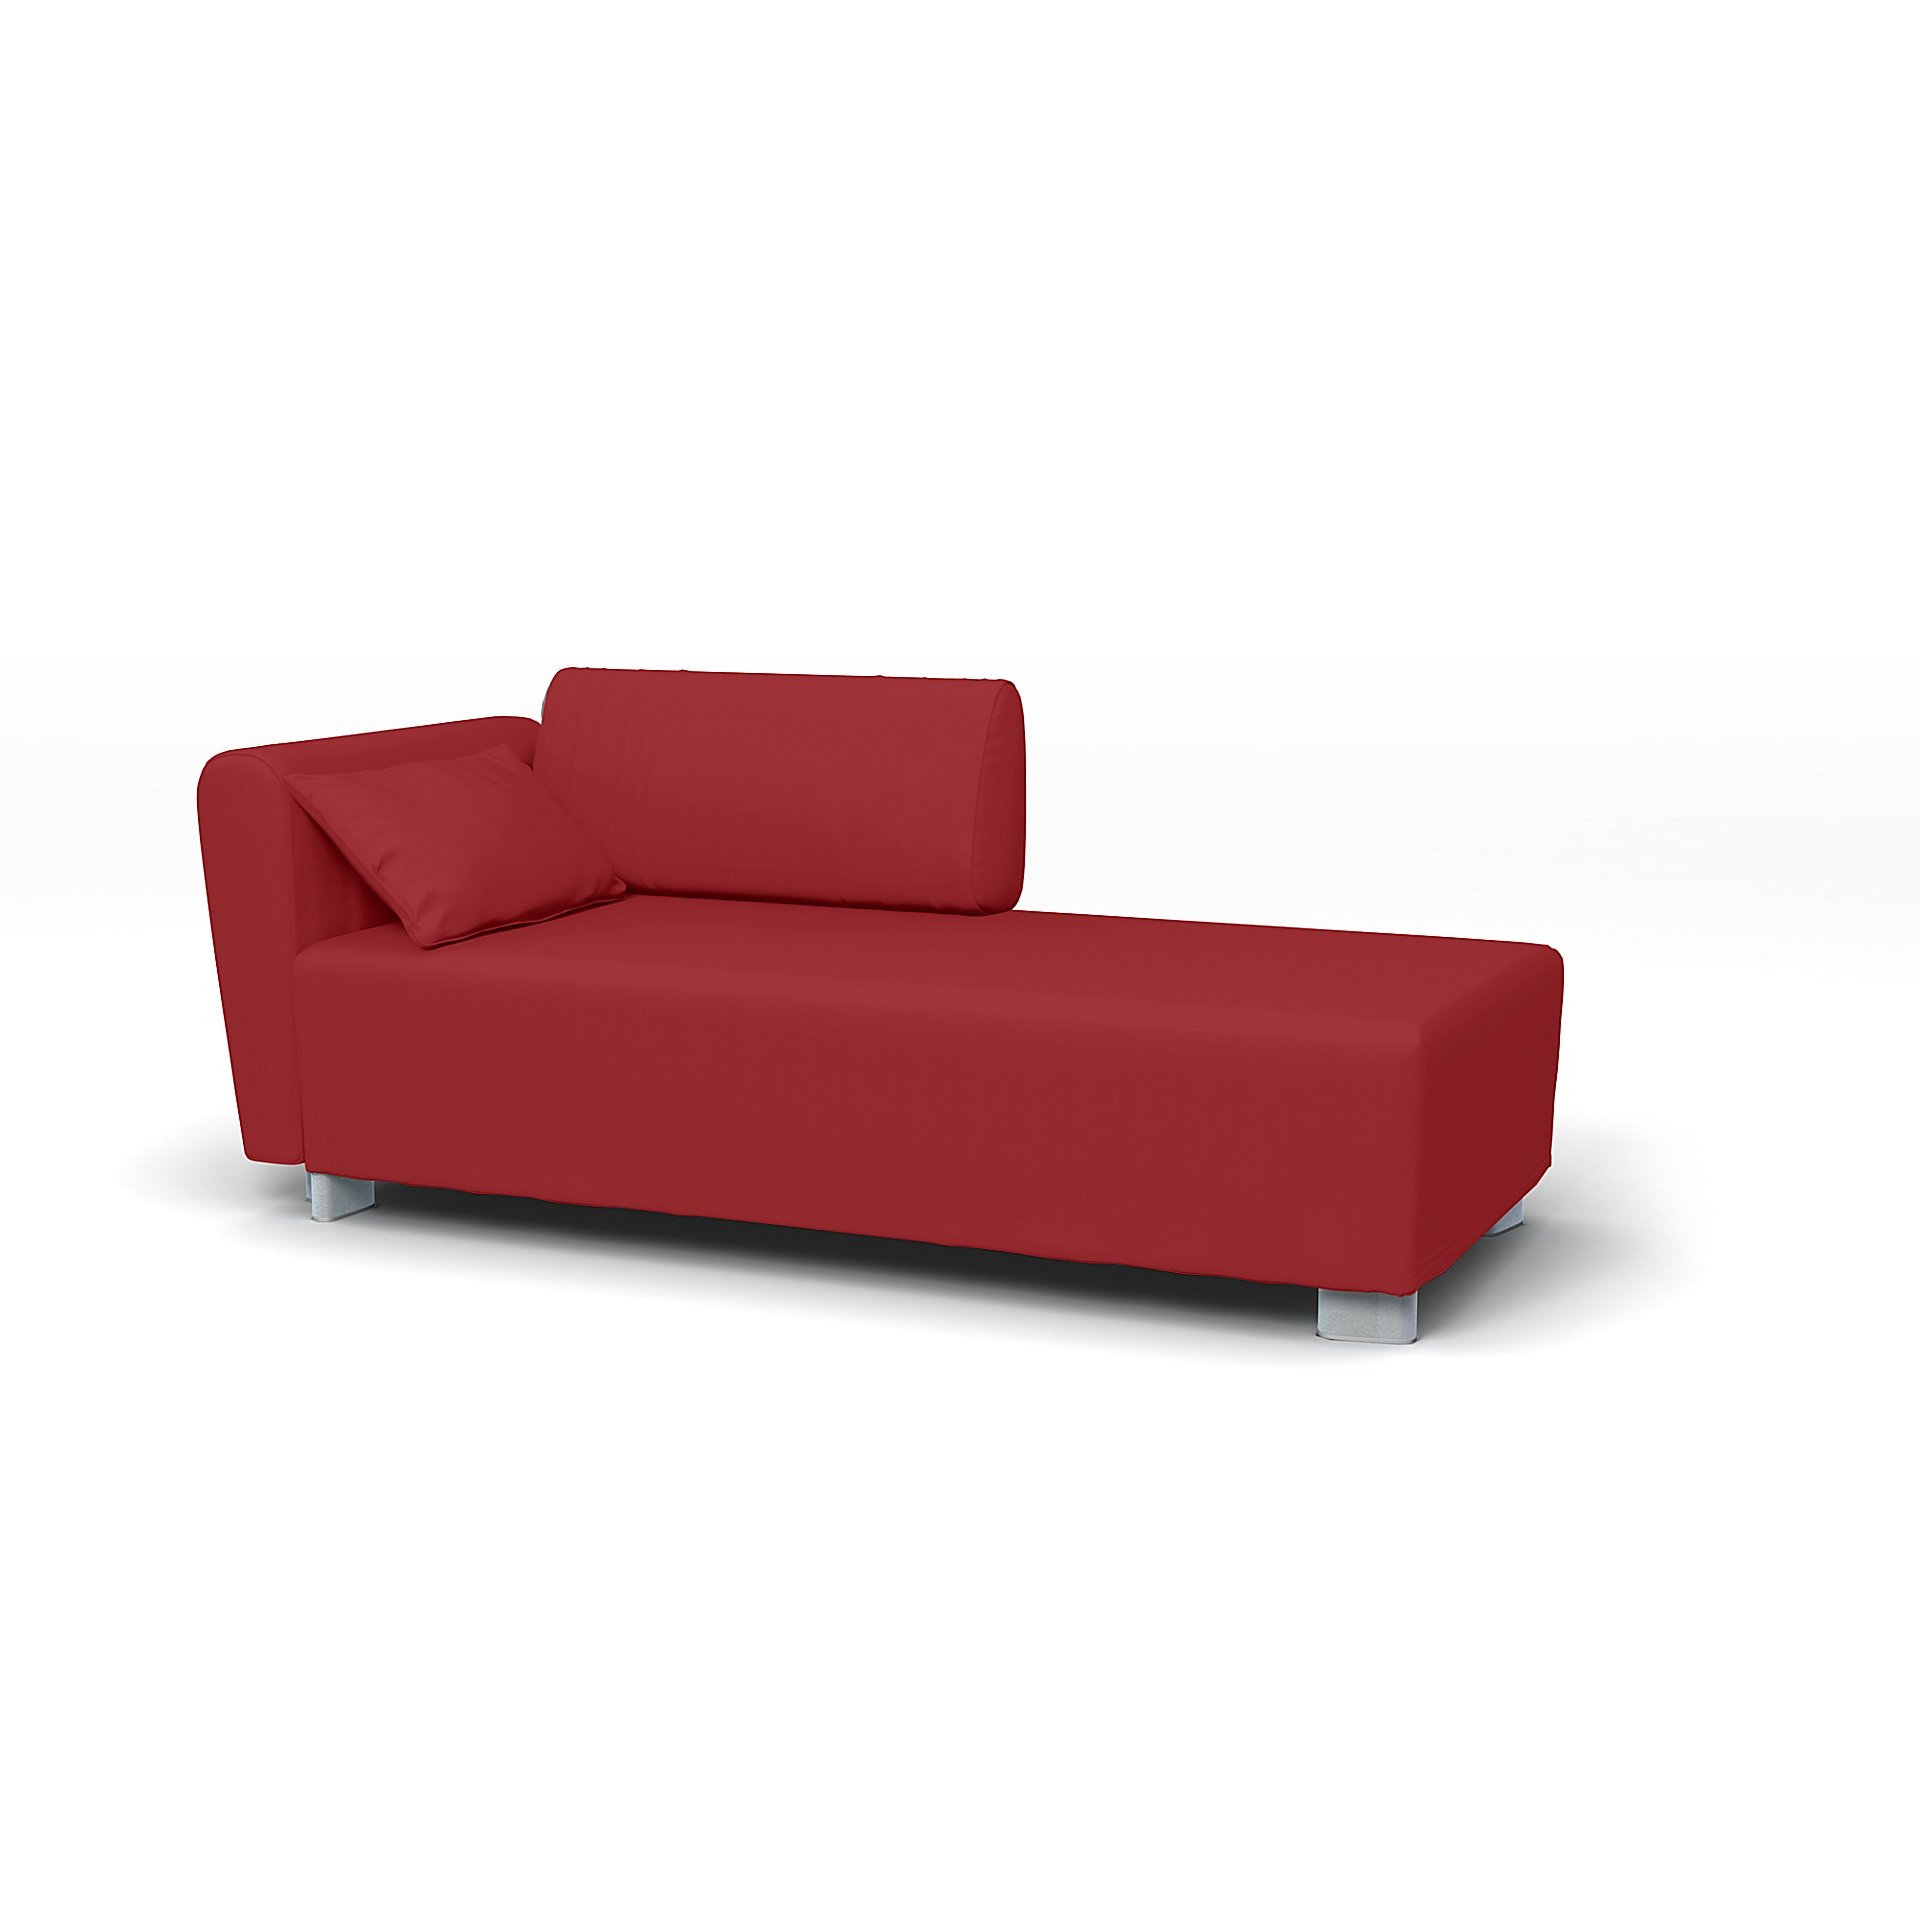 IKEA - Mysinge Chaise Longue with Armrest Cover, Scarlet Red, Cotton - Bemz